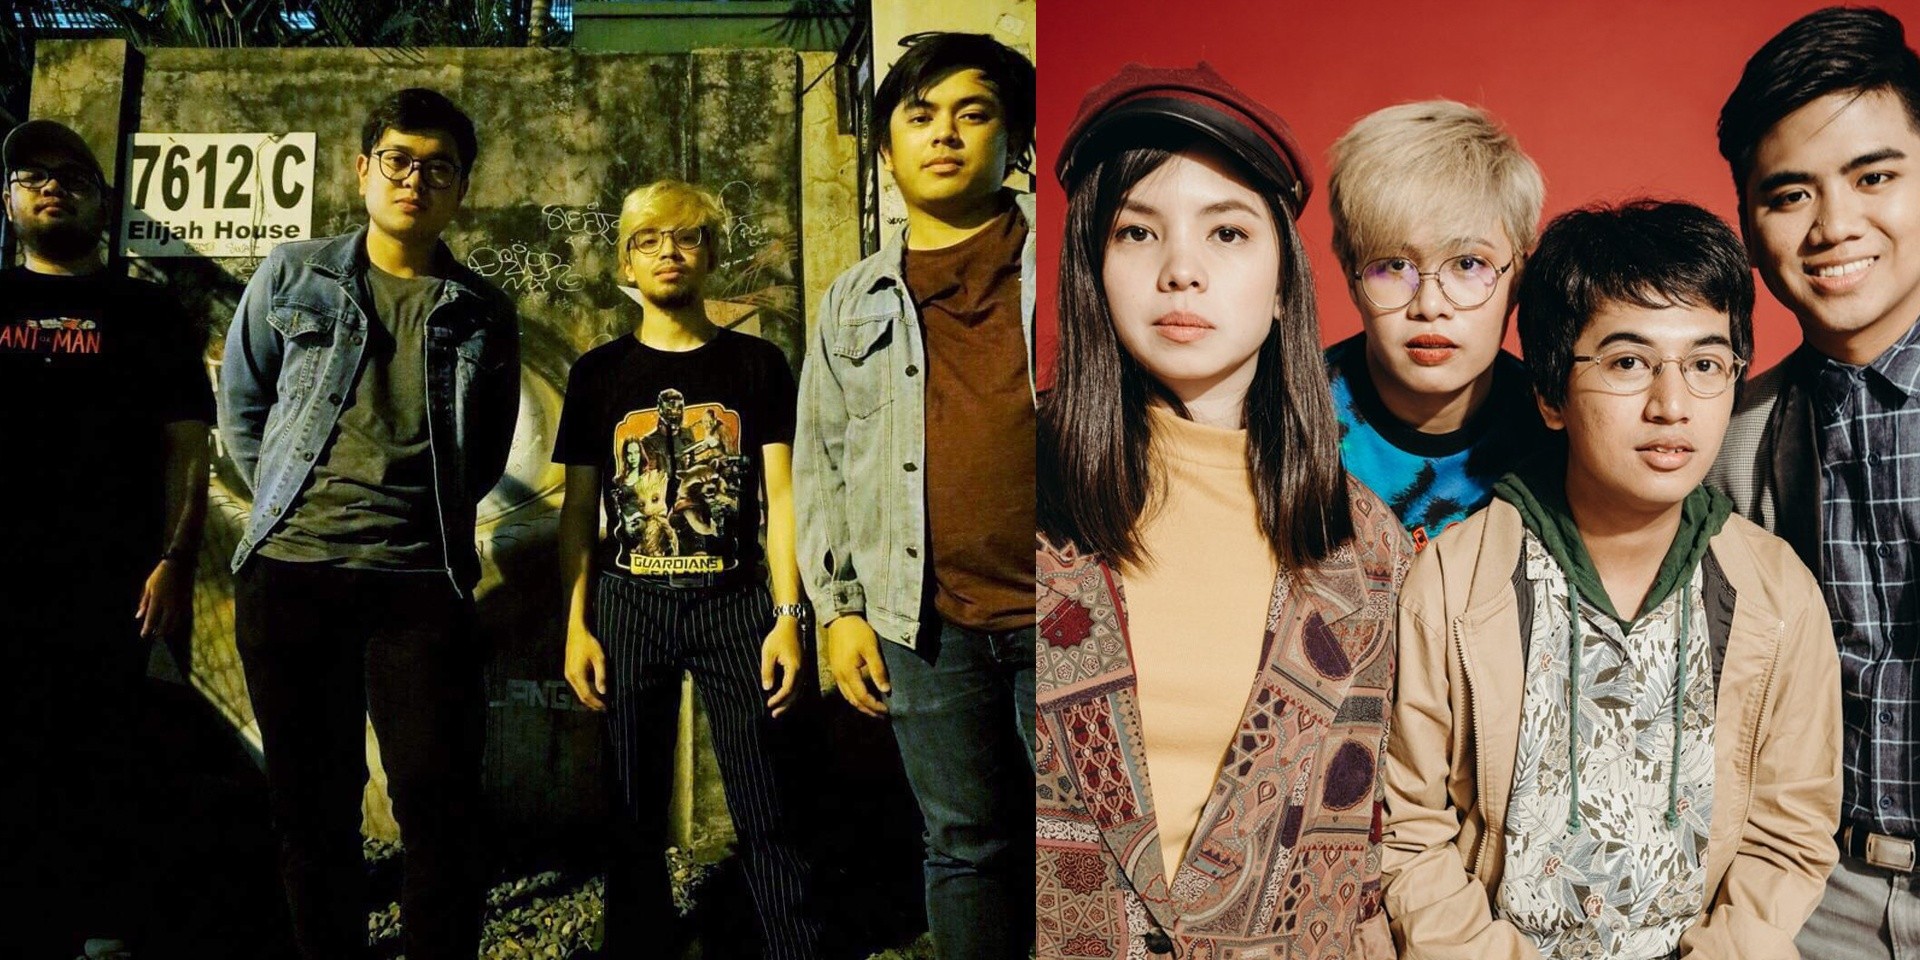 JCBX and Oh, Flamingo! to perform at  Asia Pacific Music Festival in Hong Kong